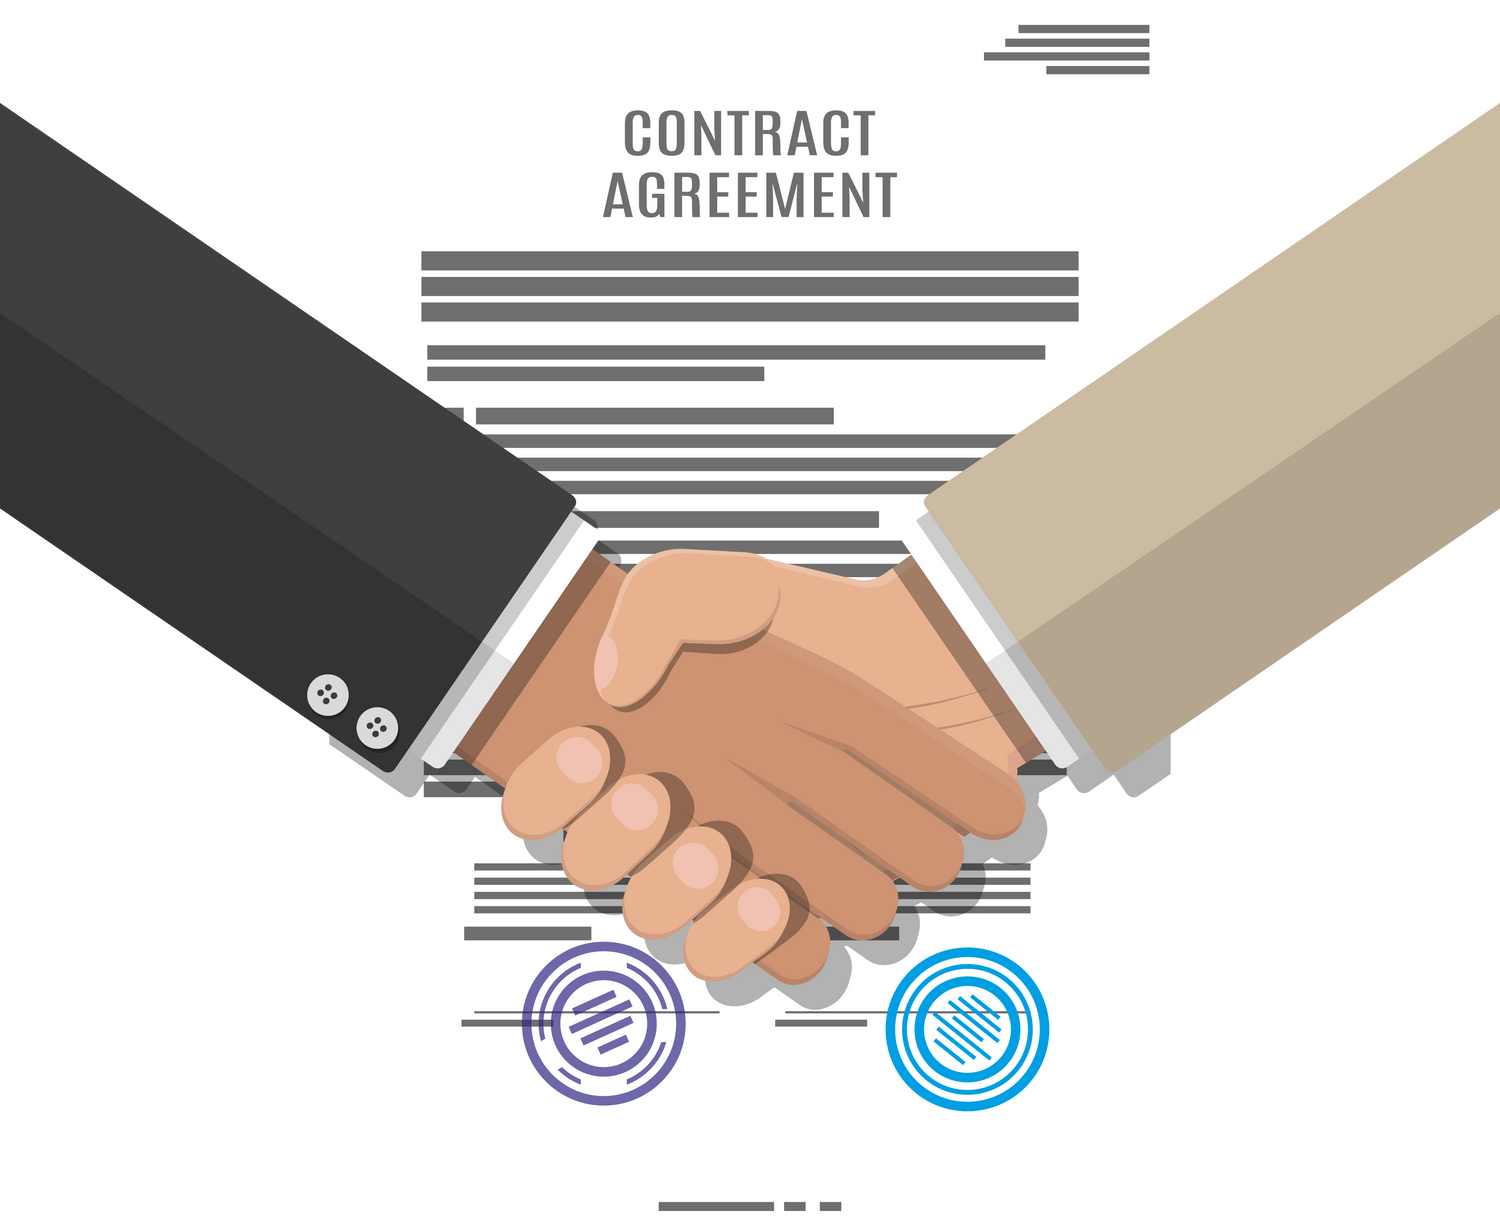 Contract Agreement Paper and Handshake